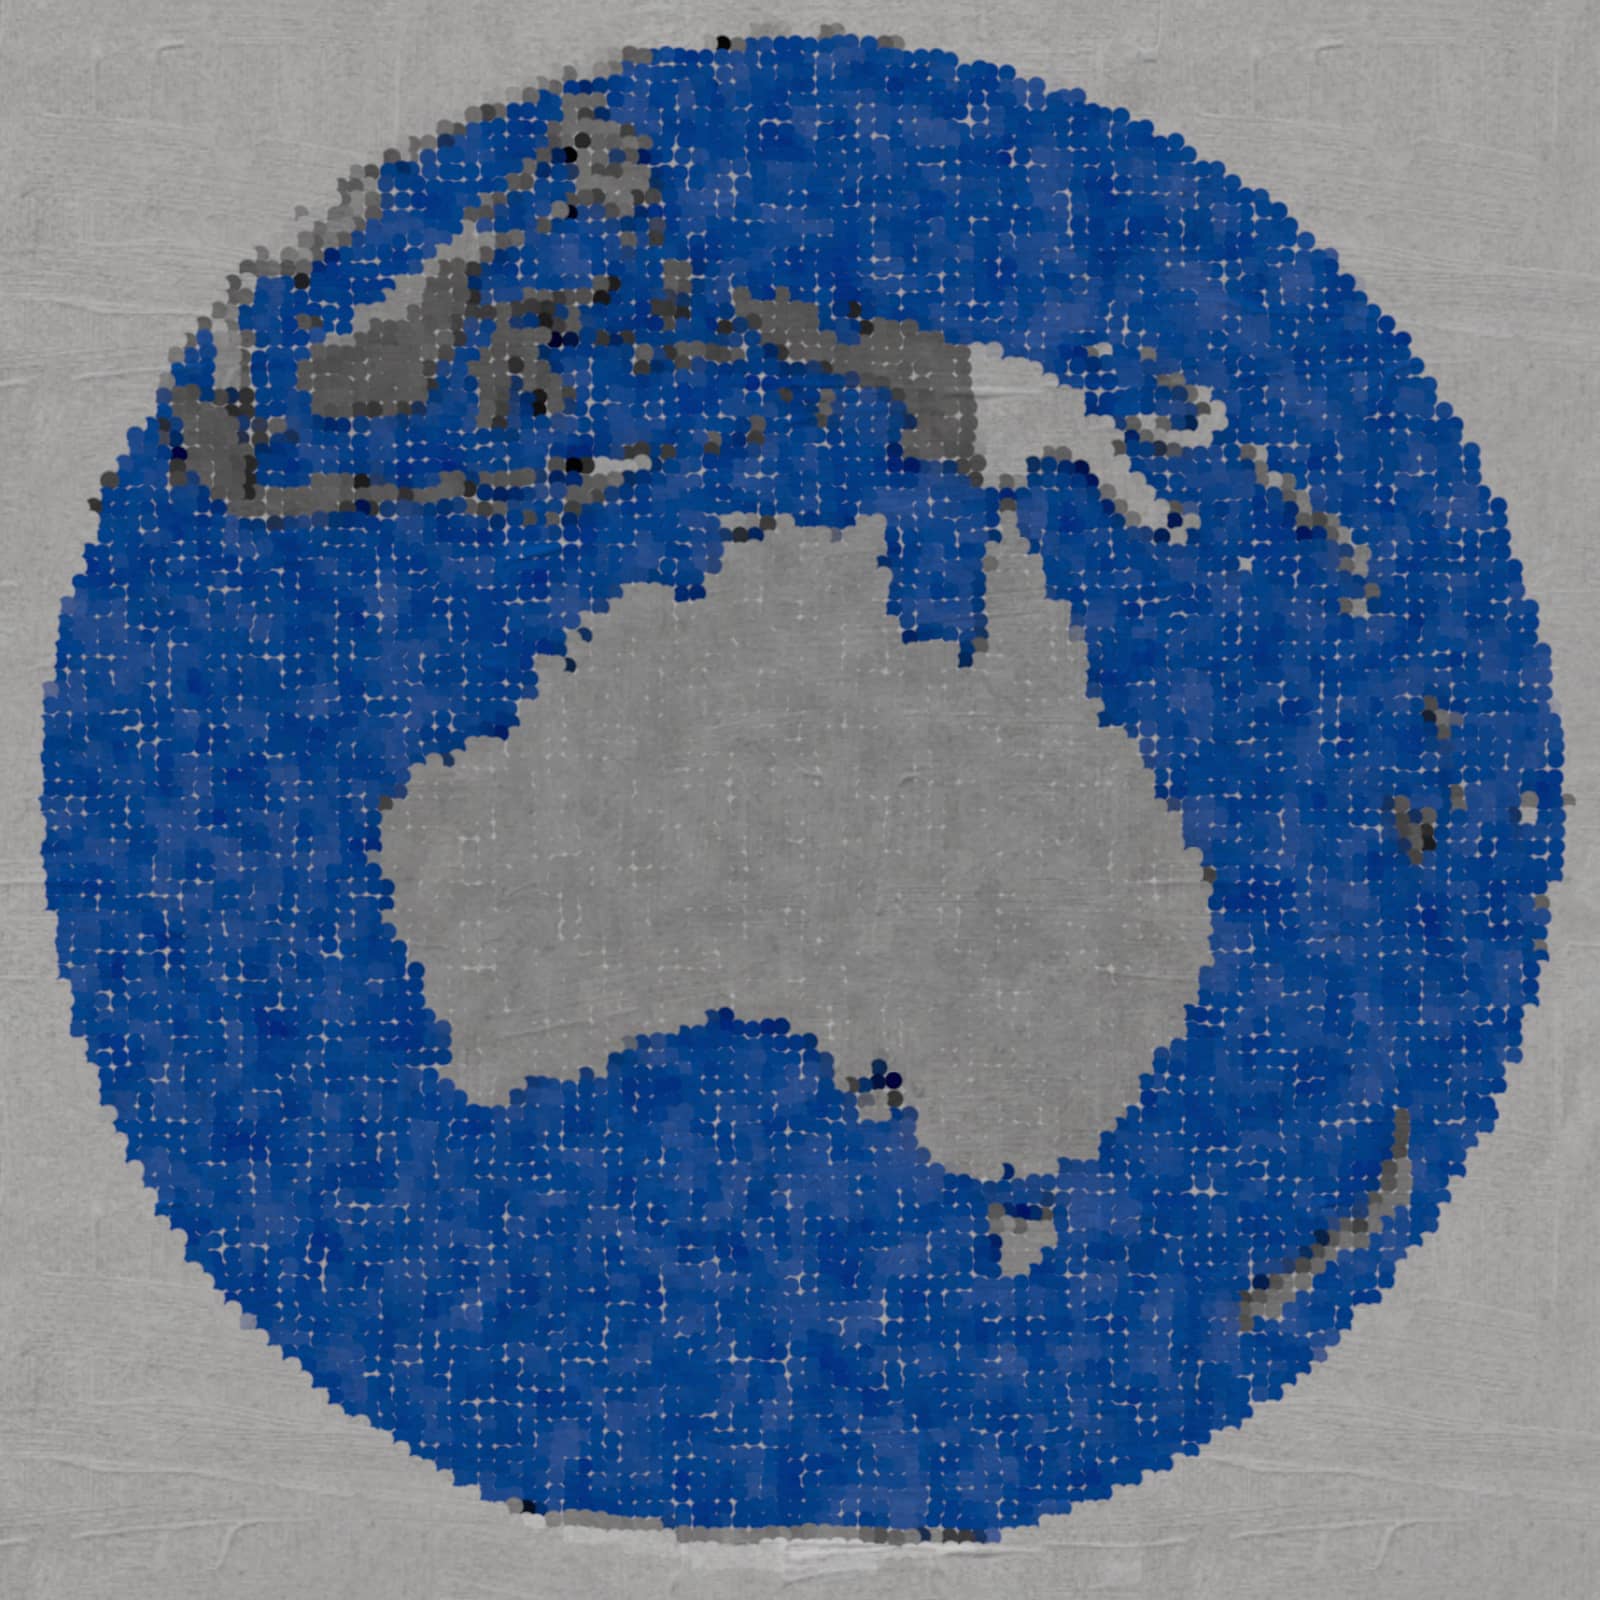 Drawing of Australia on Earth by Harvepino